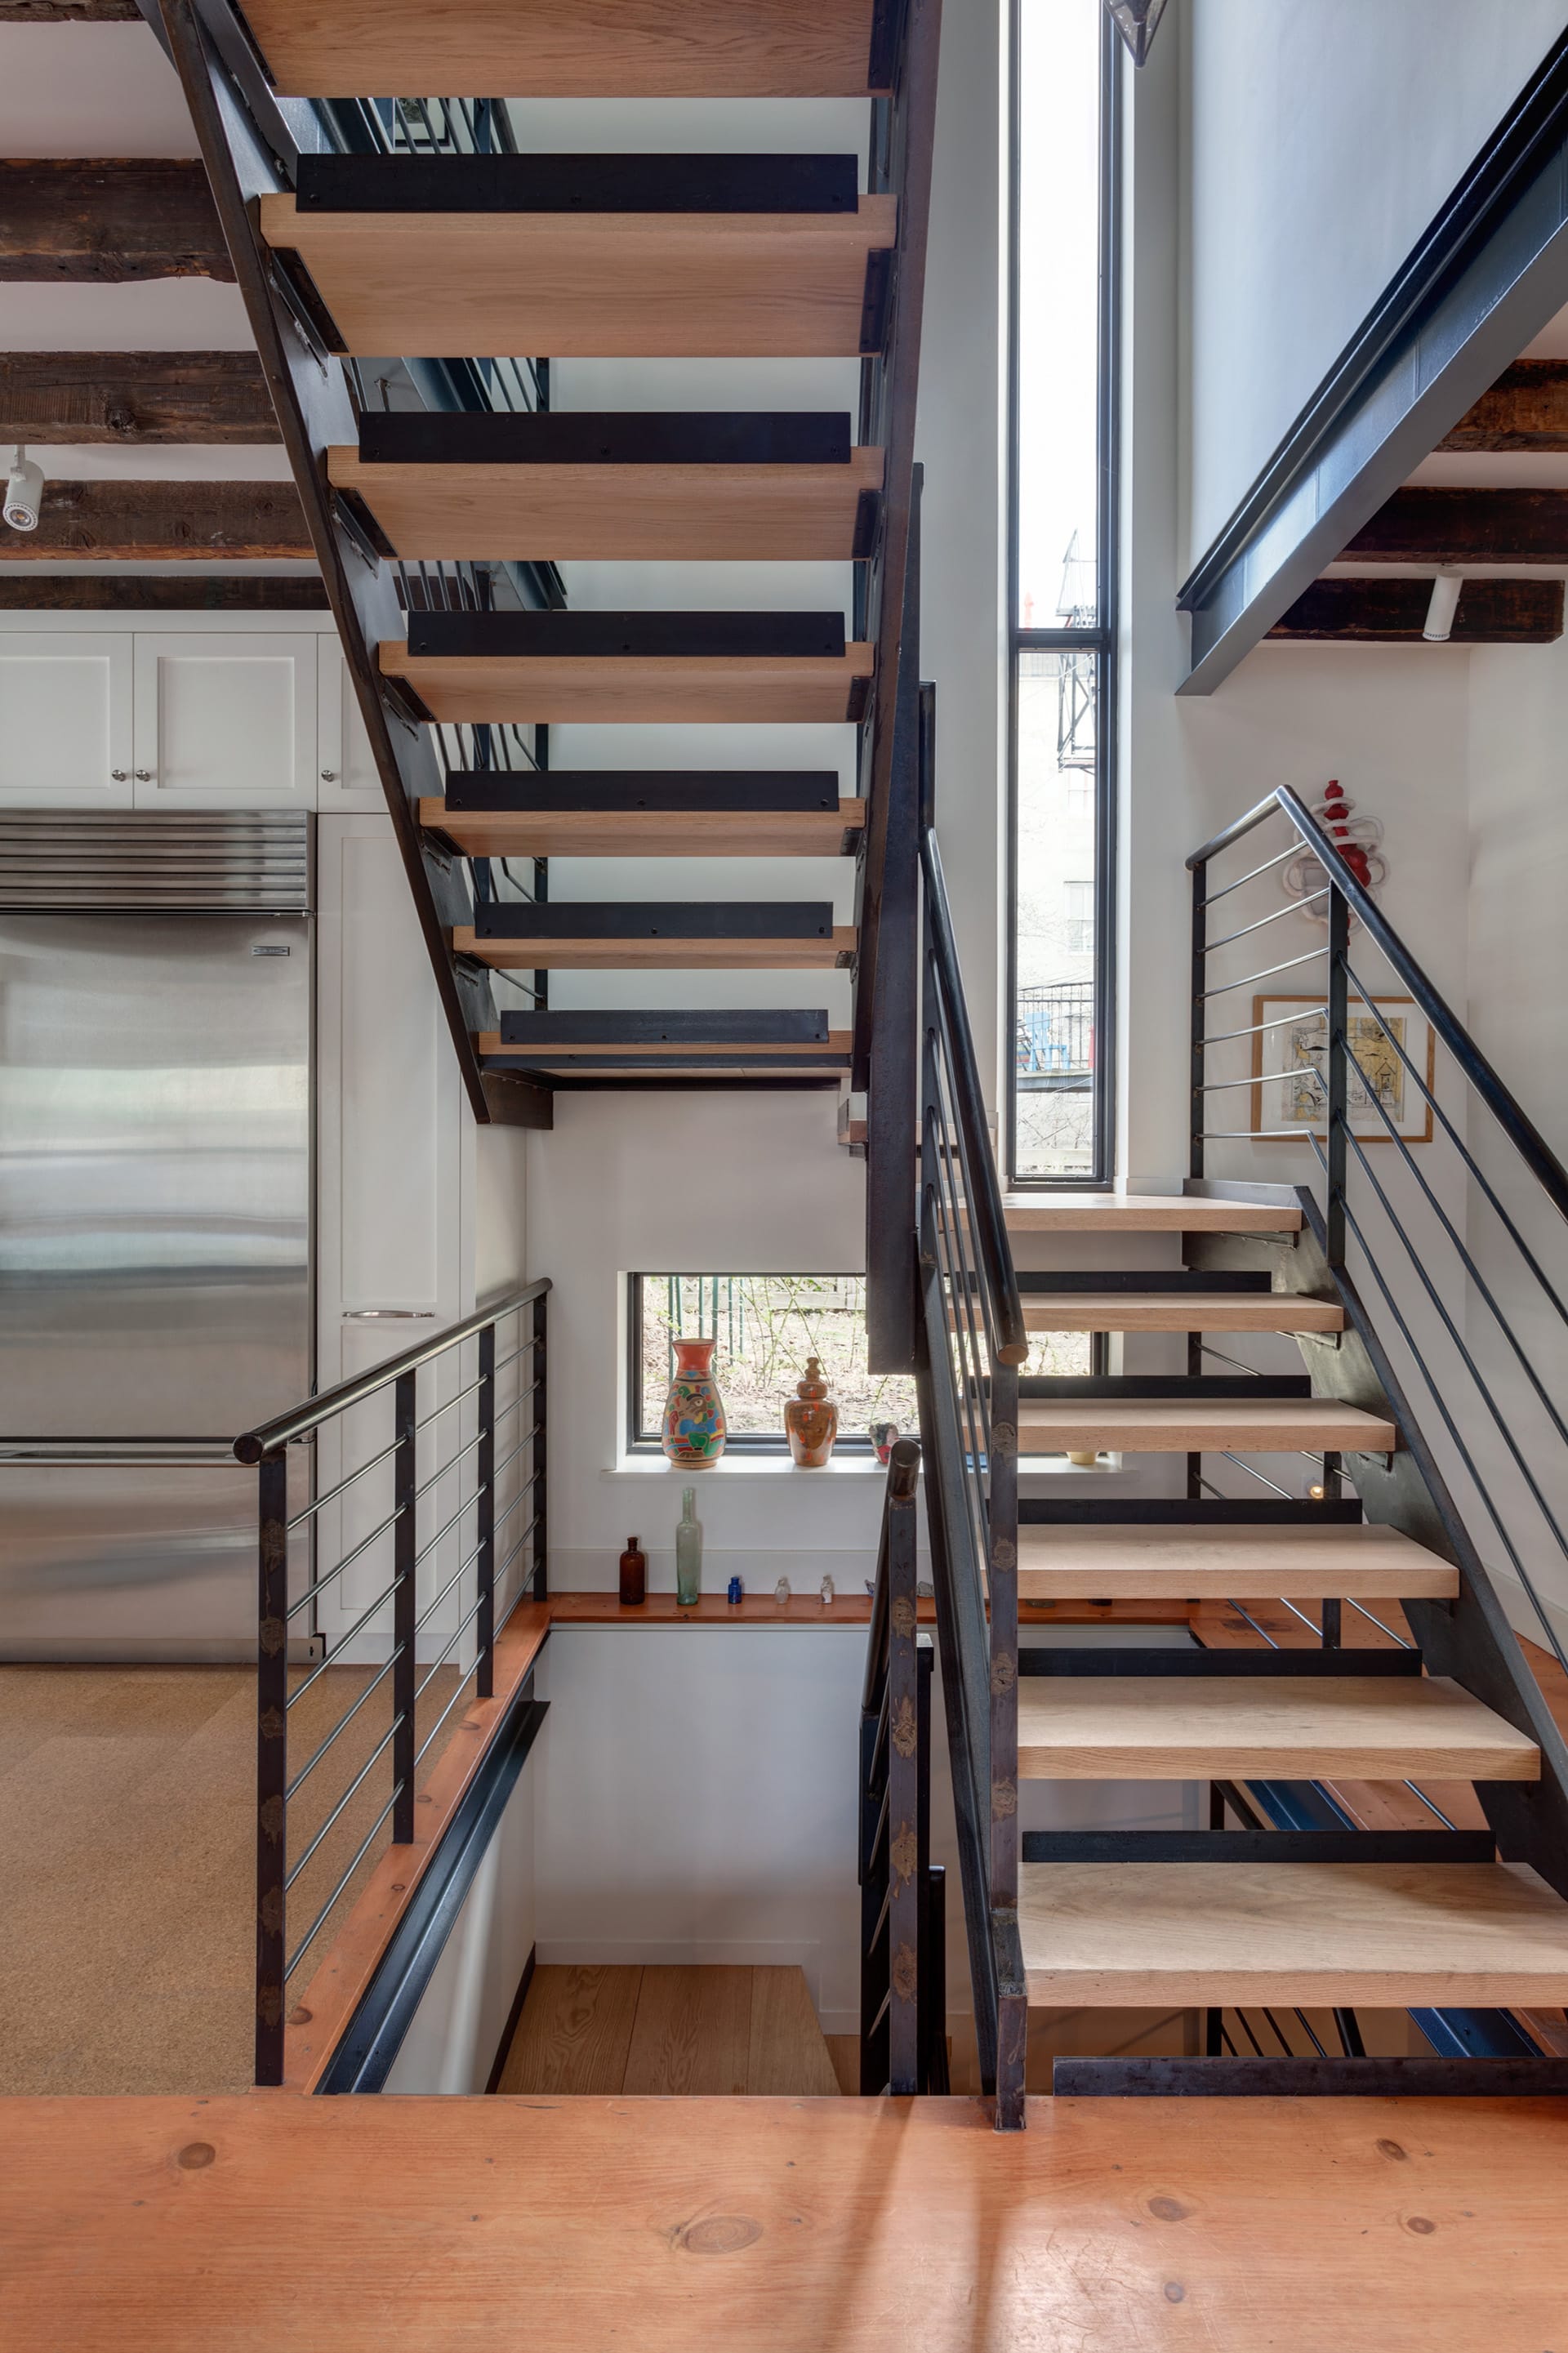 Open stringer, open riser metal and wood staircase with a long, skinny window at the landings.